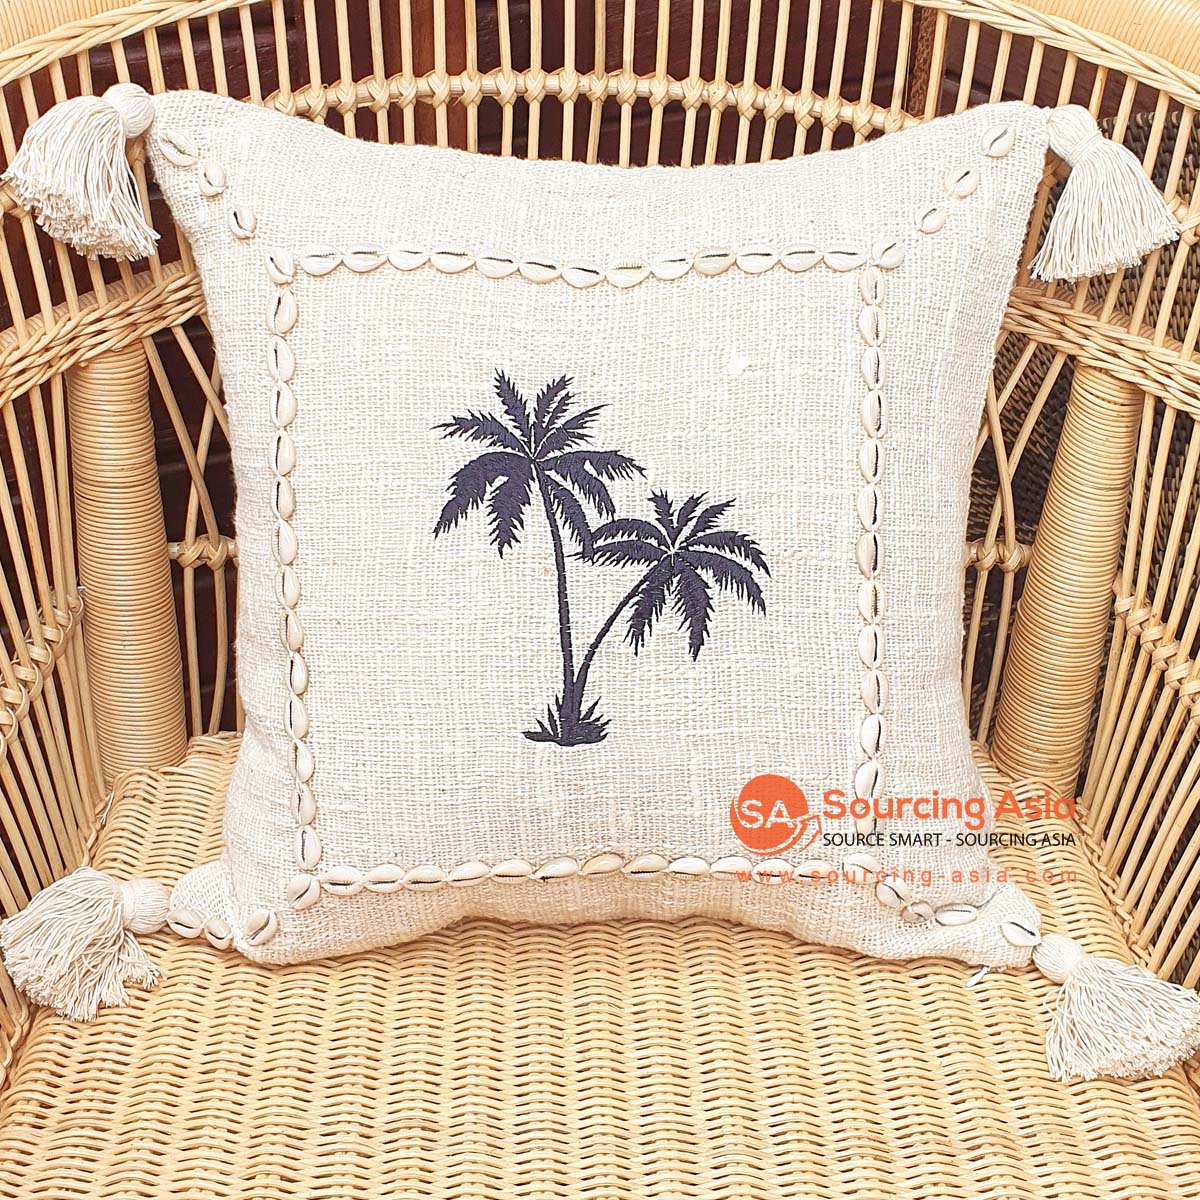 MAC306 NATURAL RAW COTTON CUSHION COVER WITH SHELLS, PALM TREES EMBROIDERY AND TASSELS (PRICE WITHOUT INNER)